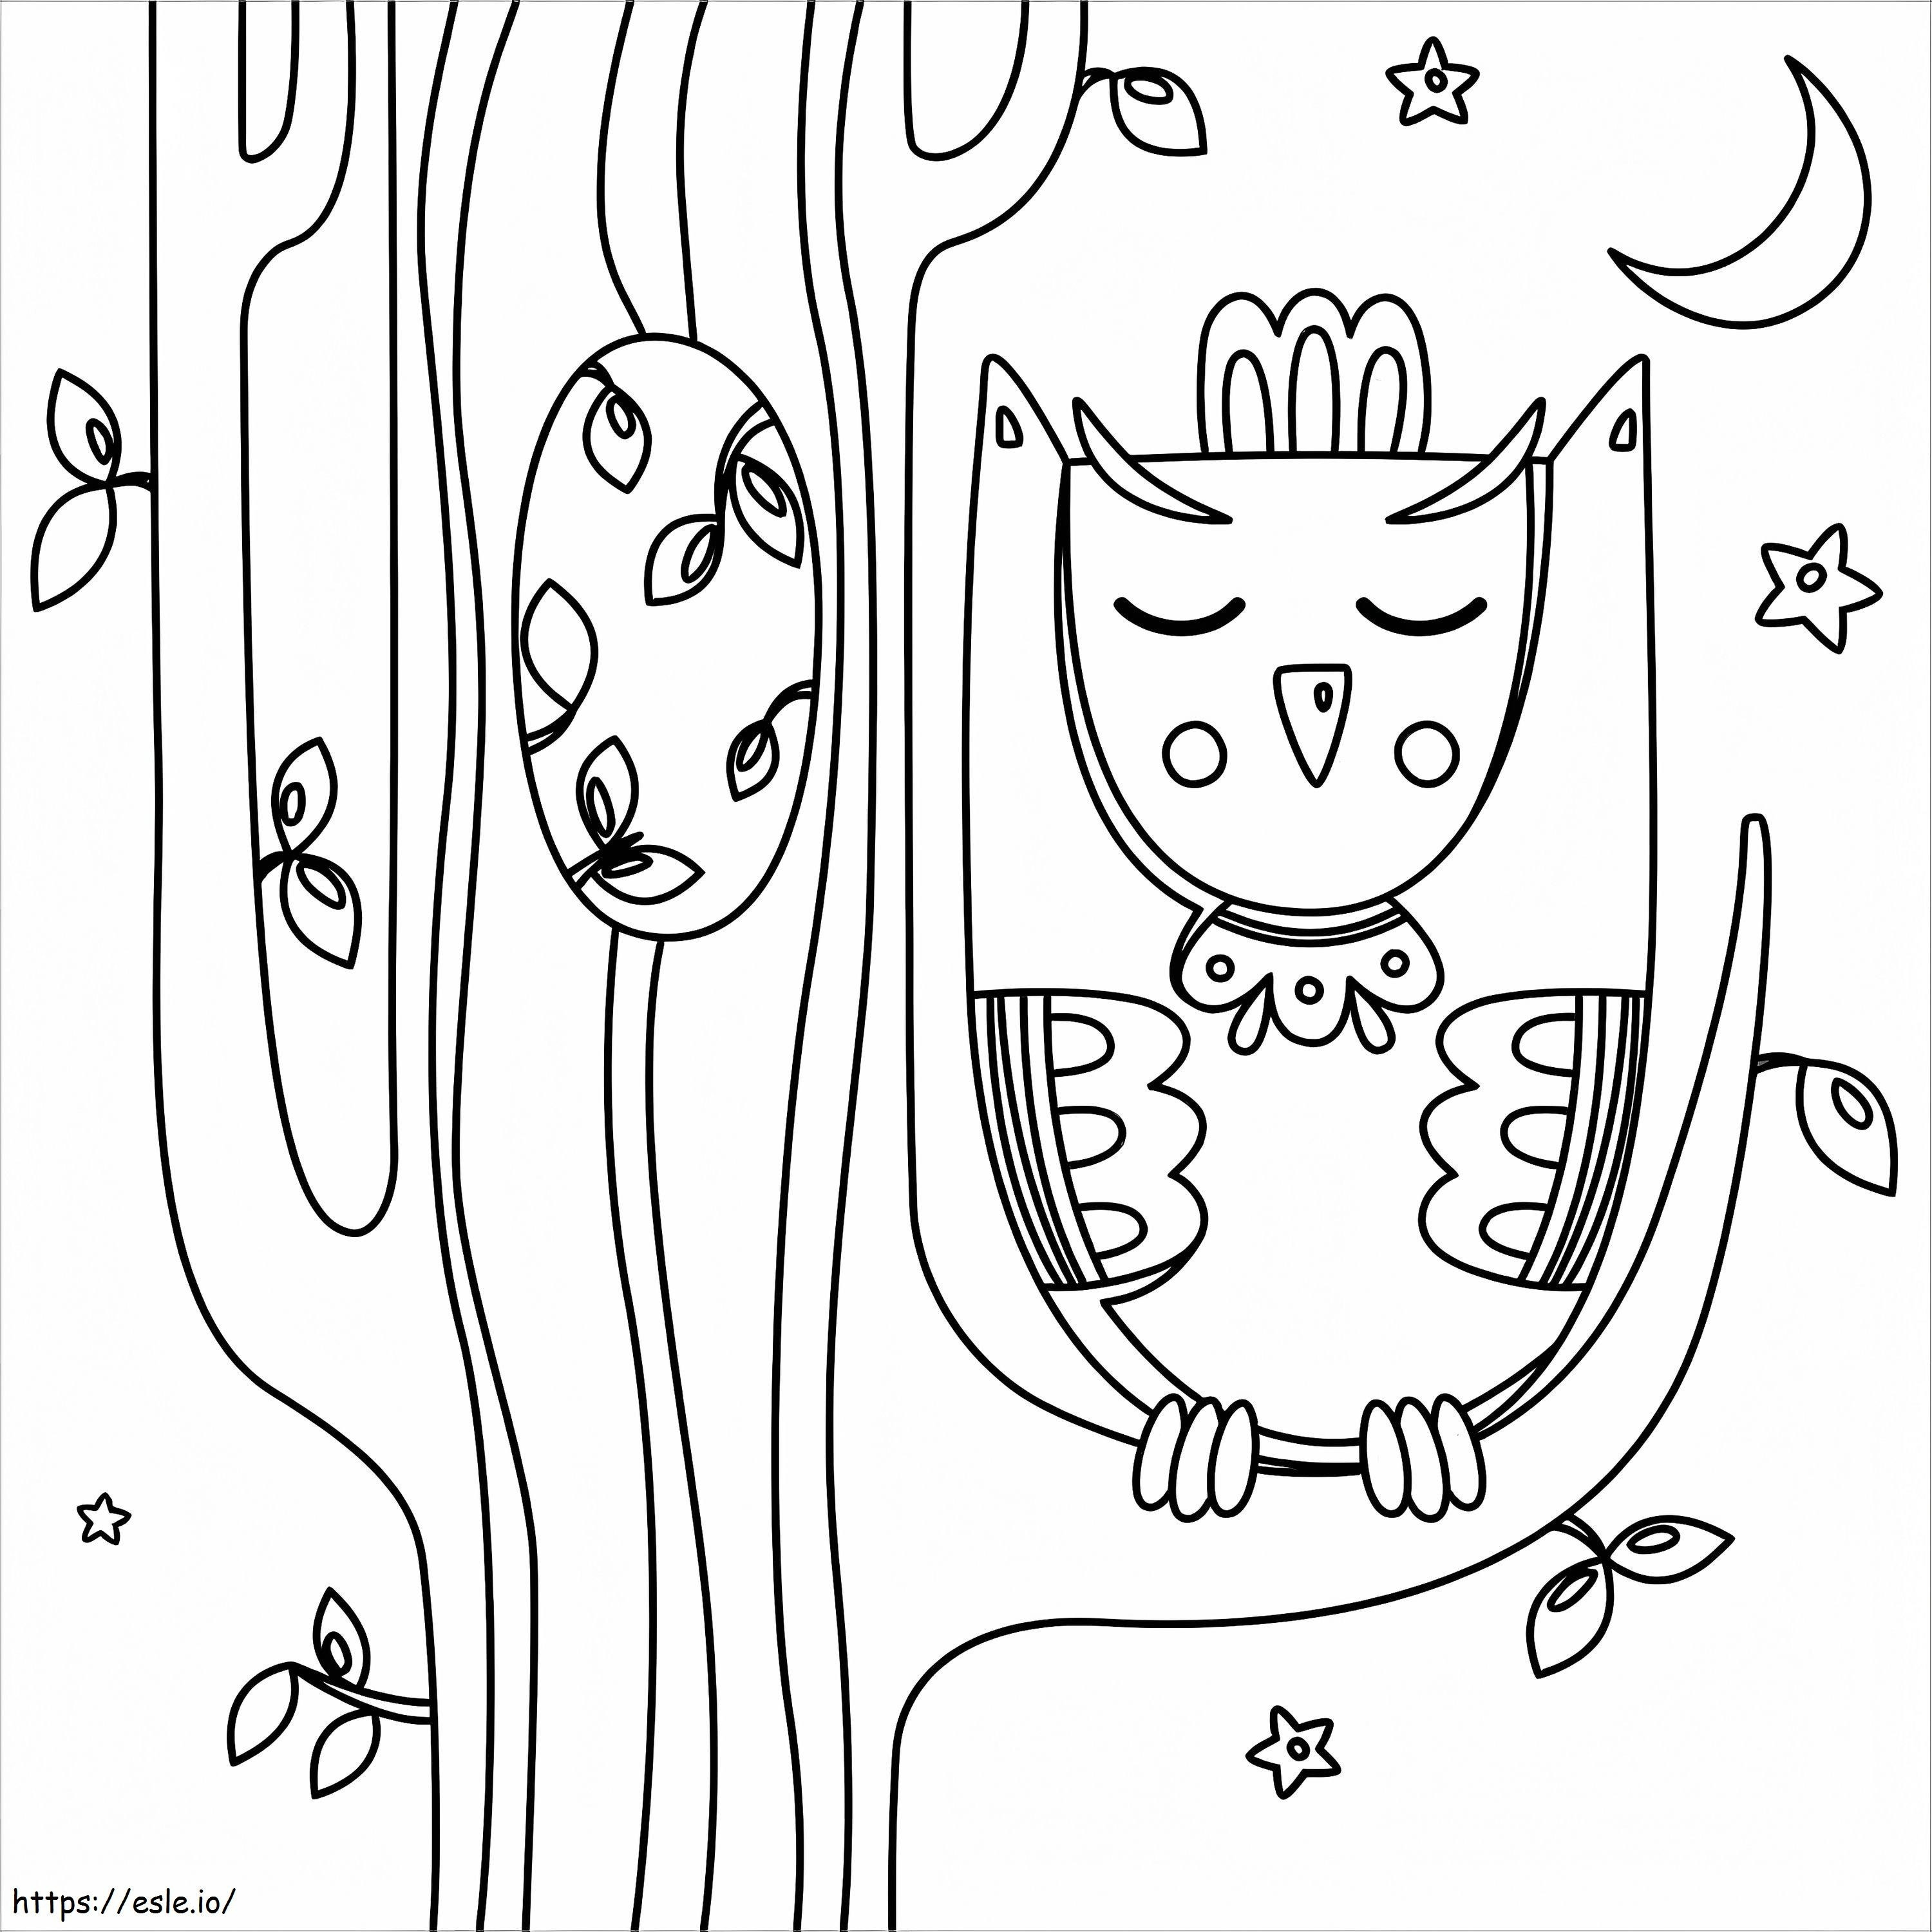 Owl 8 coloring page